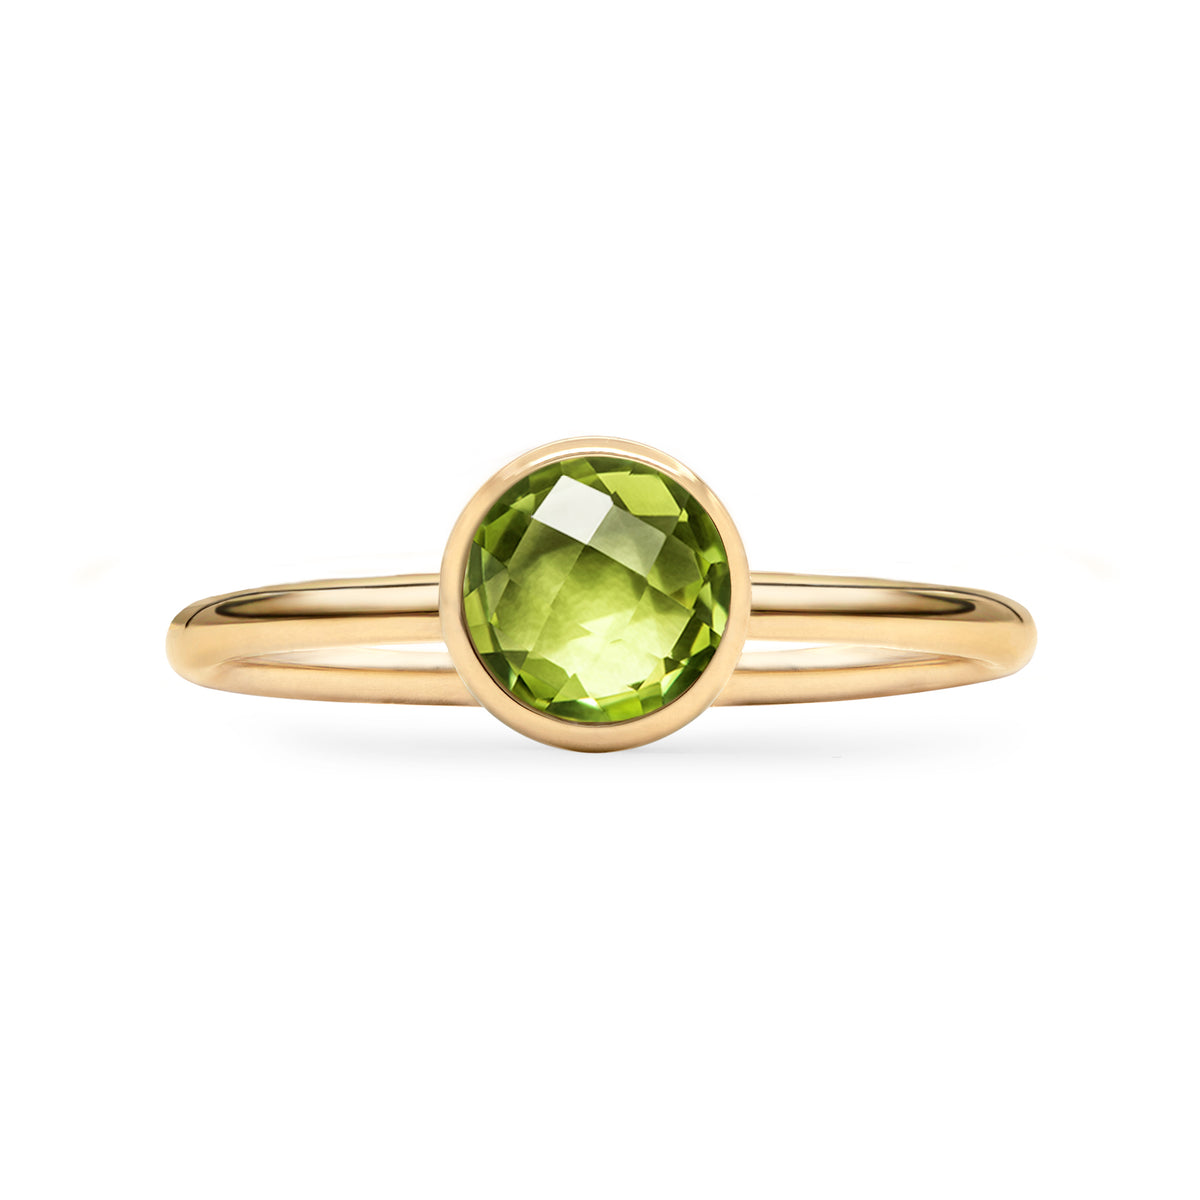 Grand Peridot Ring (August) 14k in Gold